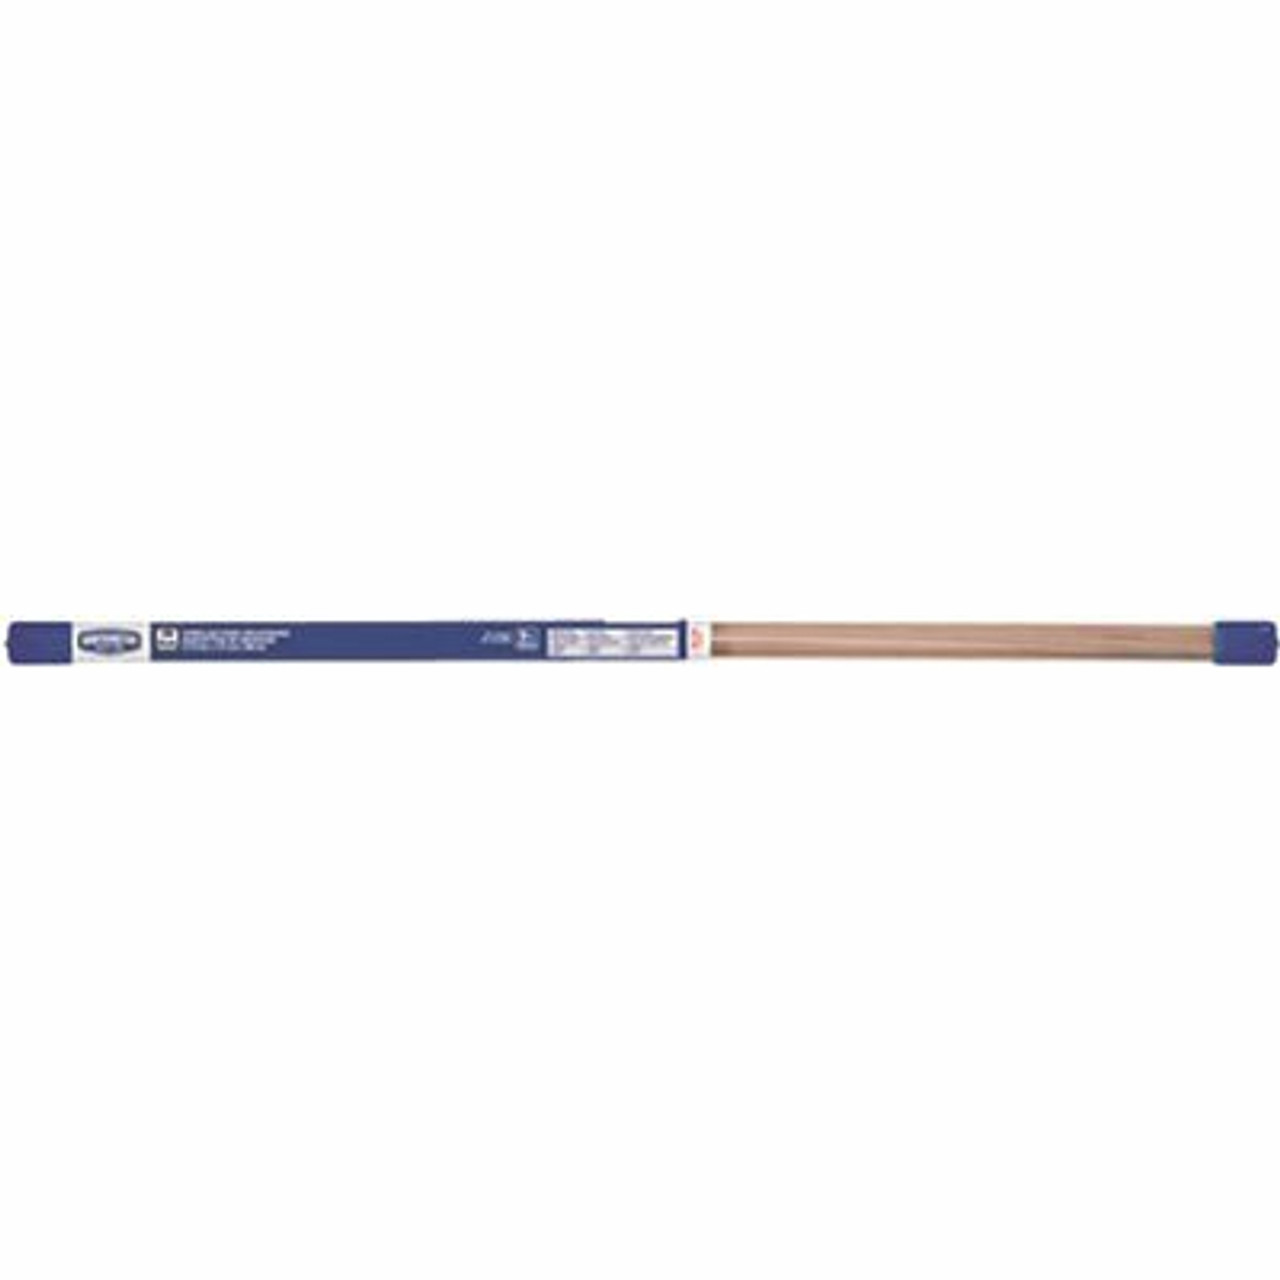 Lincoln Electric 5% Silver Flat Brazing Rods (1 Lb.-Pack)